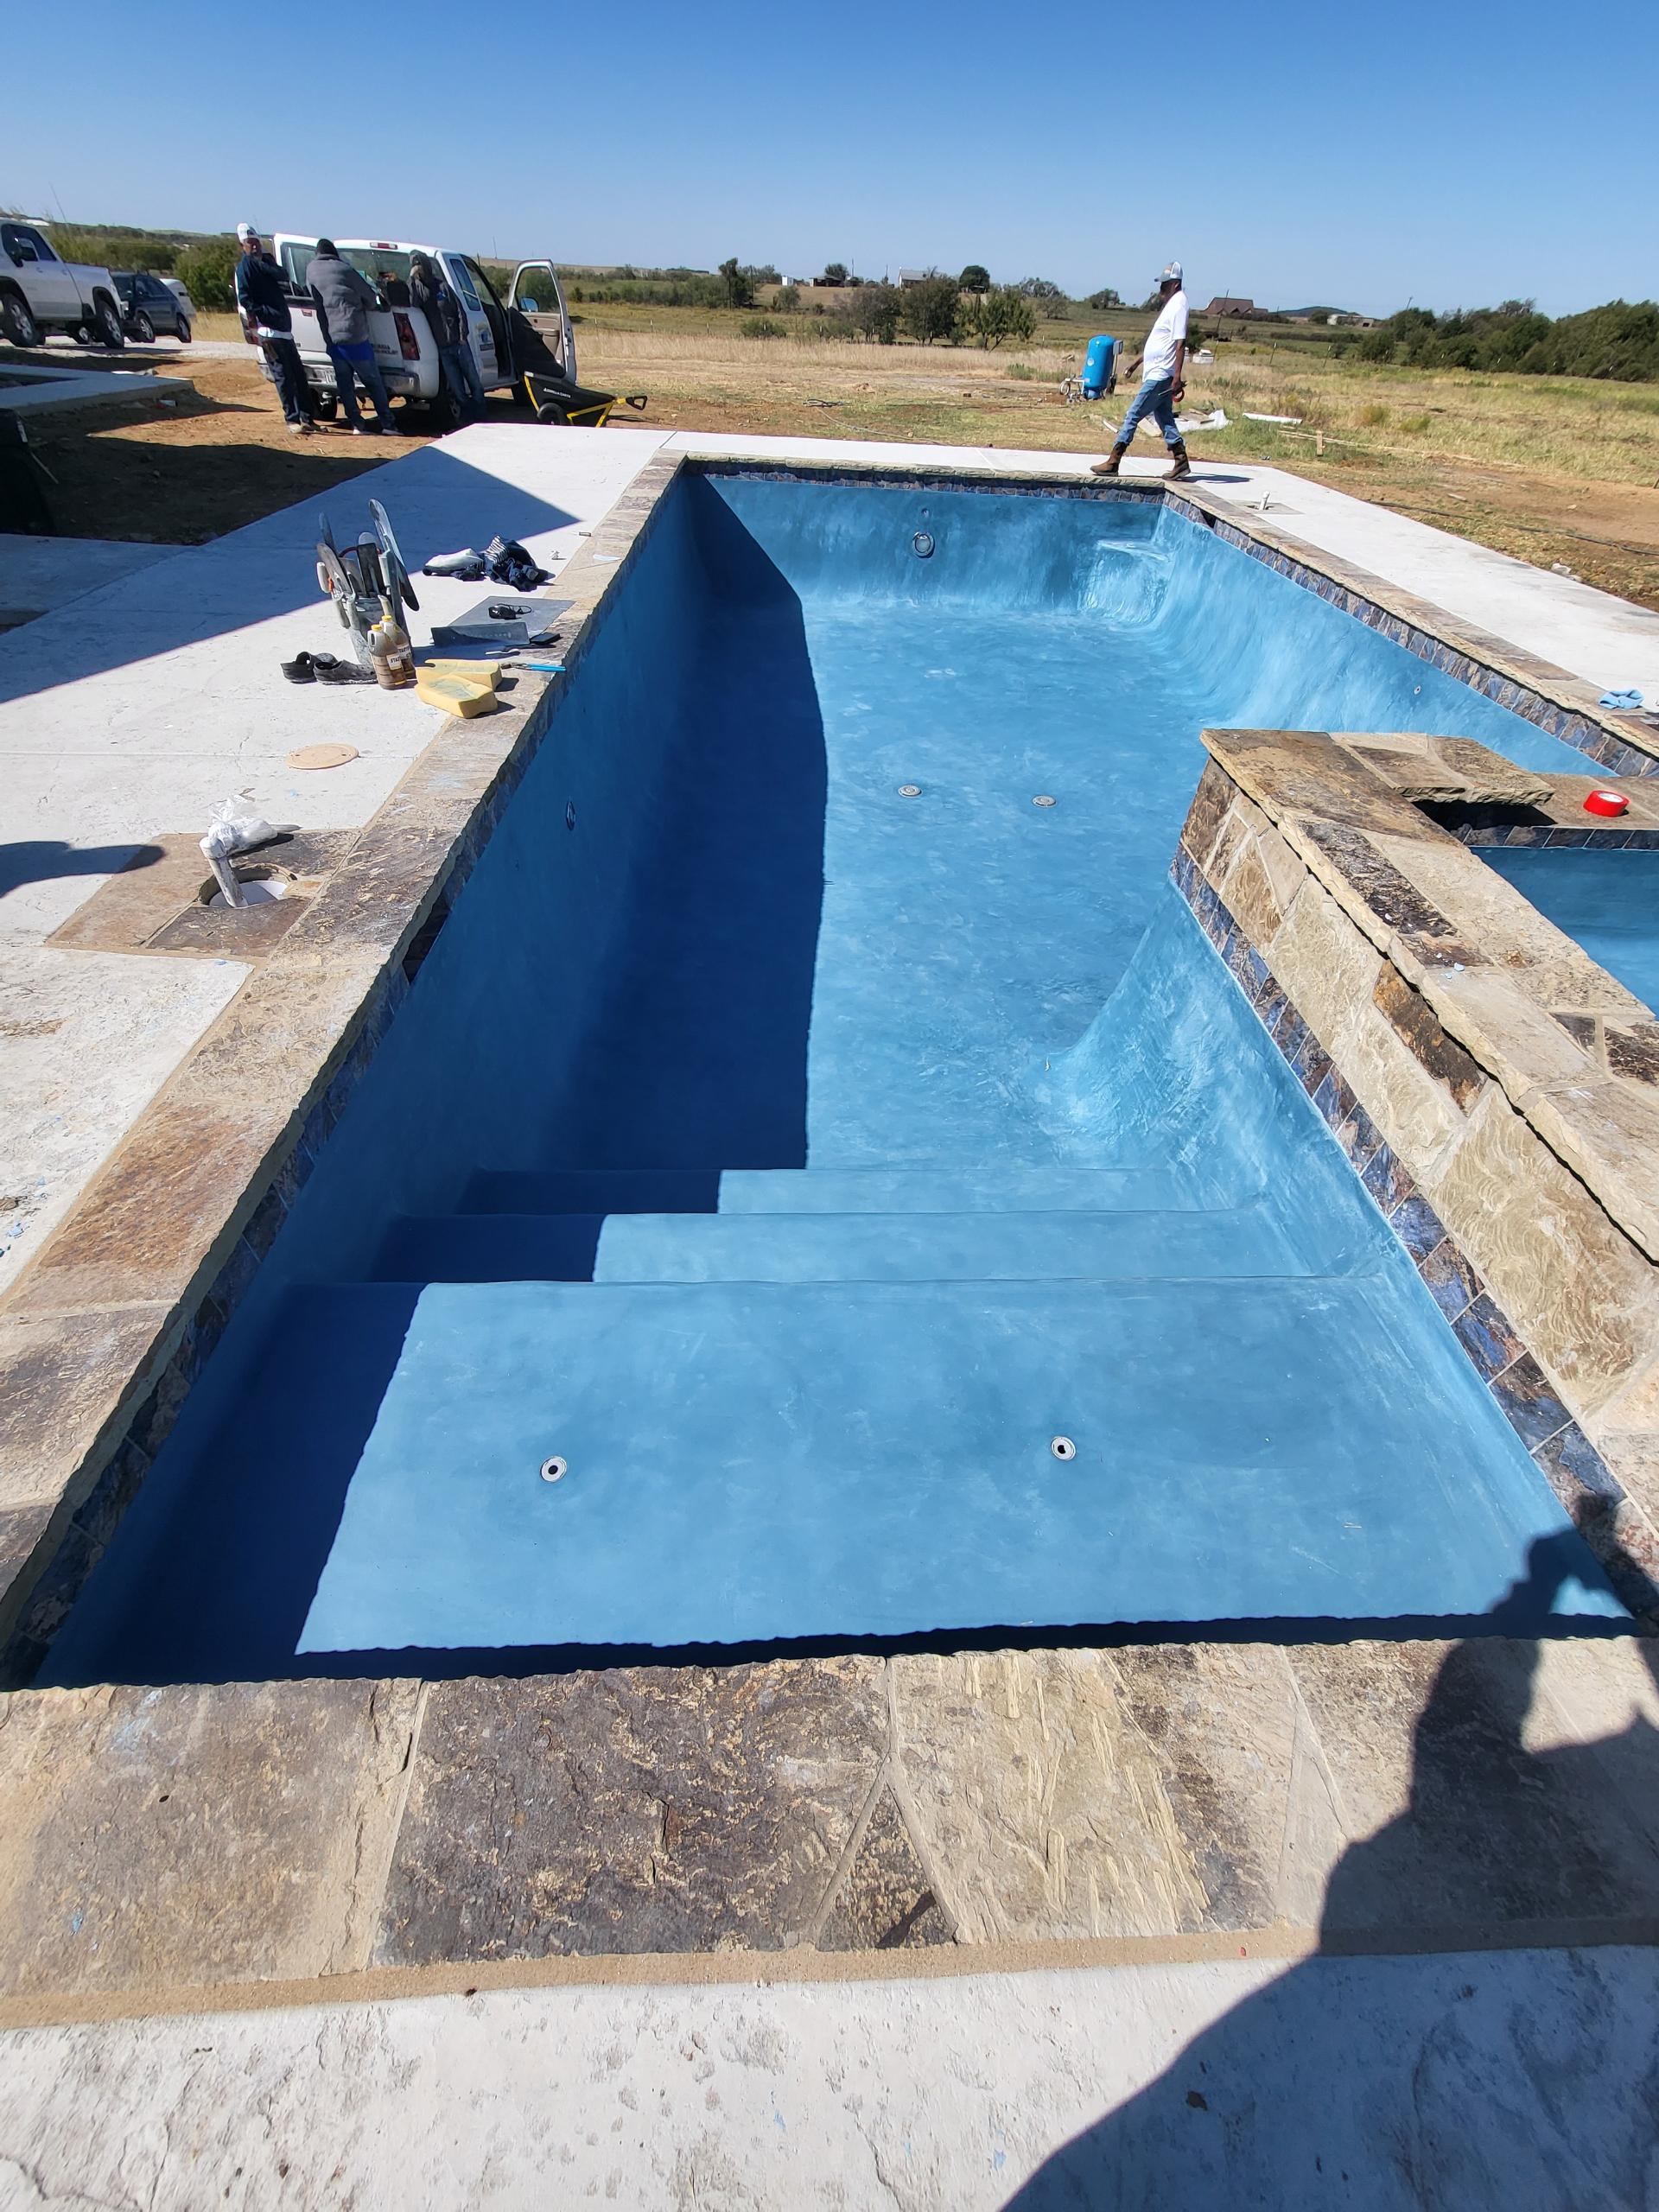 Clearwater Pools & Services is a premier pool installation company in Bowie, TX, dedicated to turning your pool dreams into reality. We provide comprehensive pool construction services, ensuring your satisfaction every step of the way.